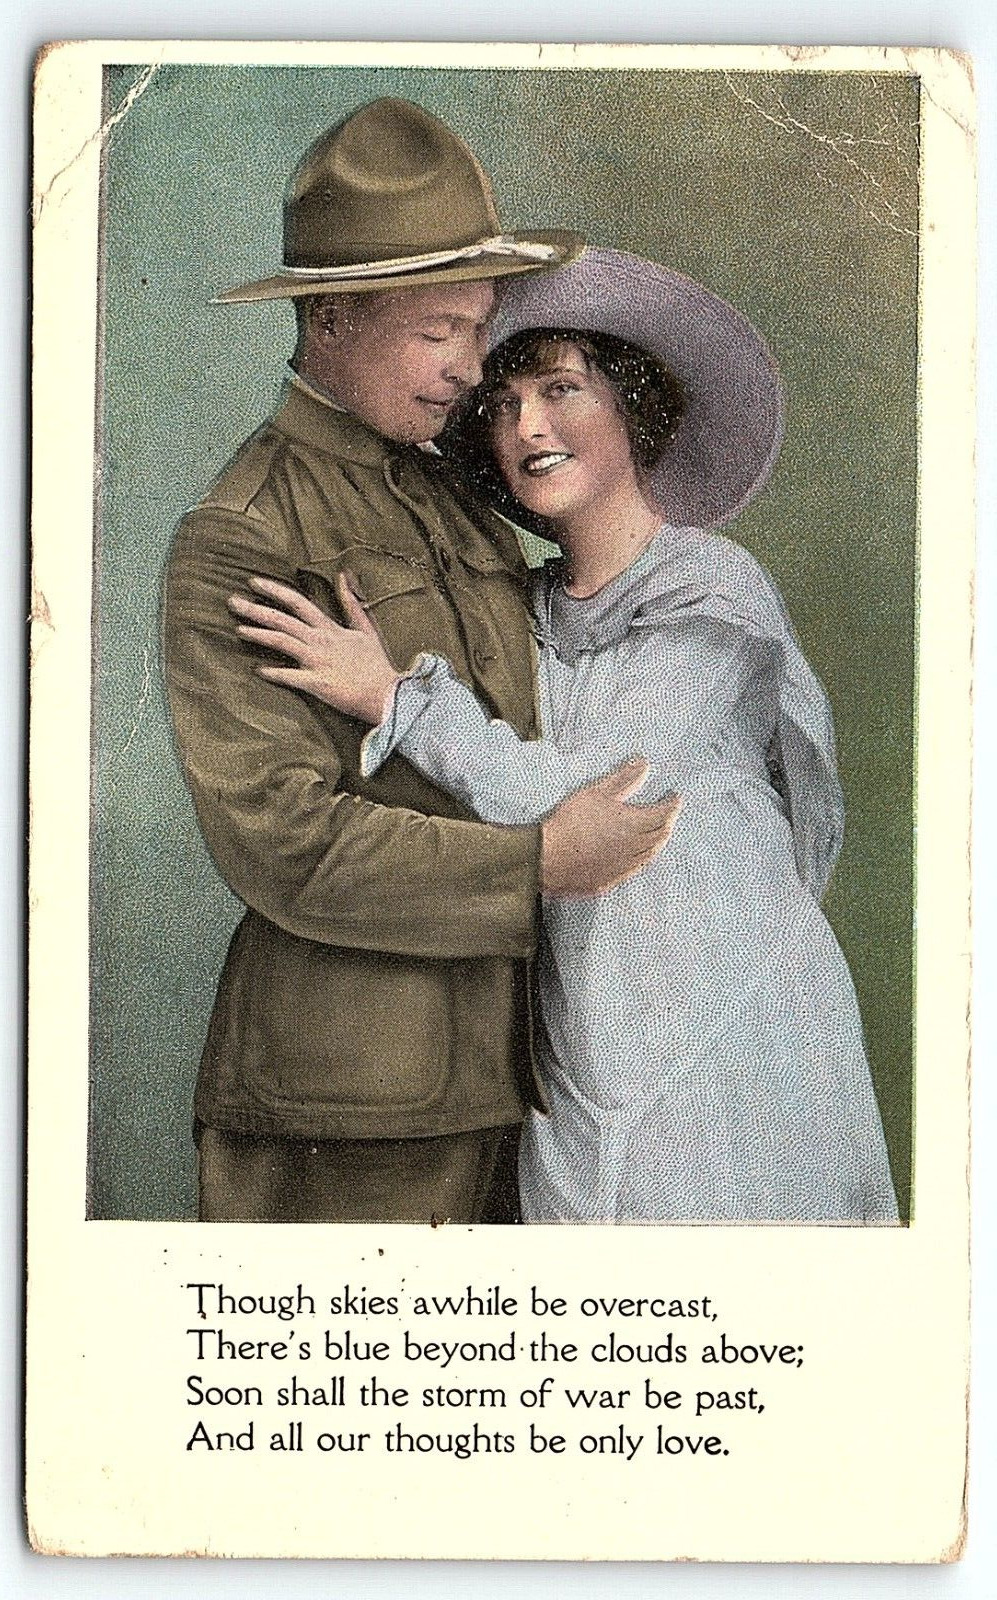 c1915 WWI ERA ROMANTIC LOVE SOLDIER WITH GIRLFRIEND UNPOSTED POSTCARD P3689